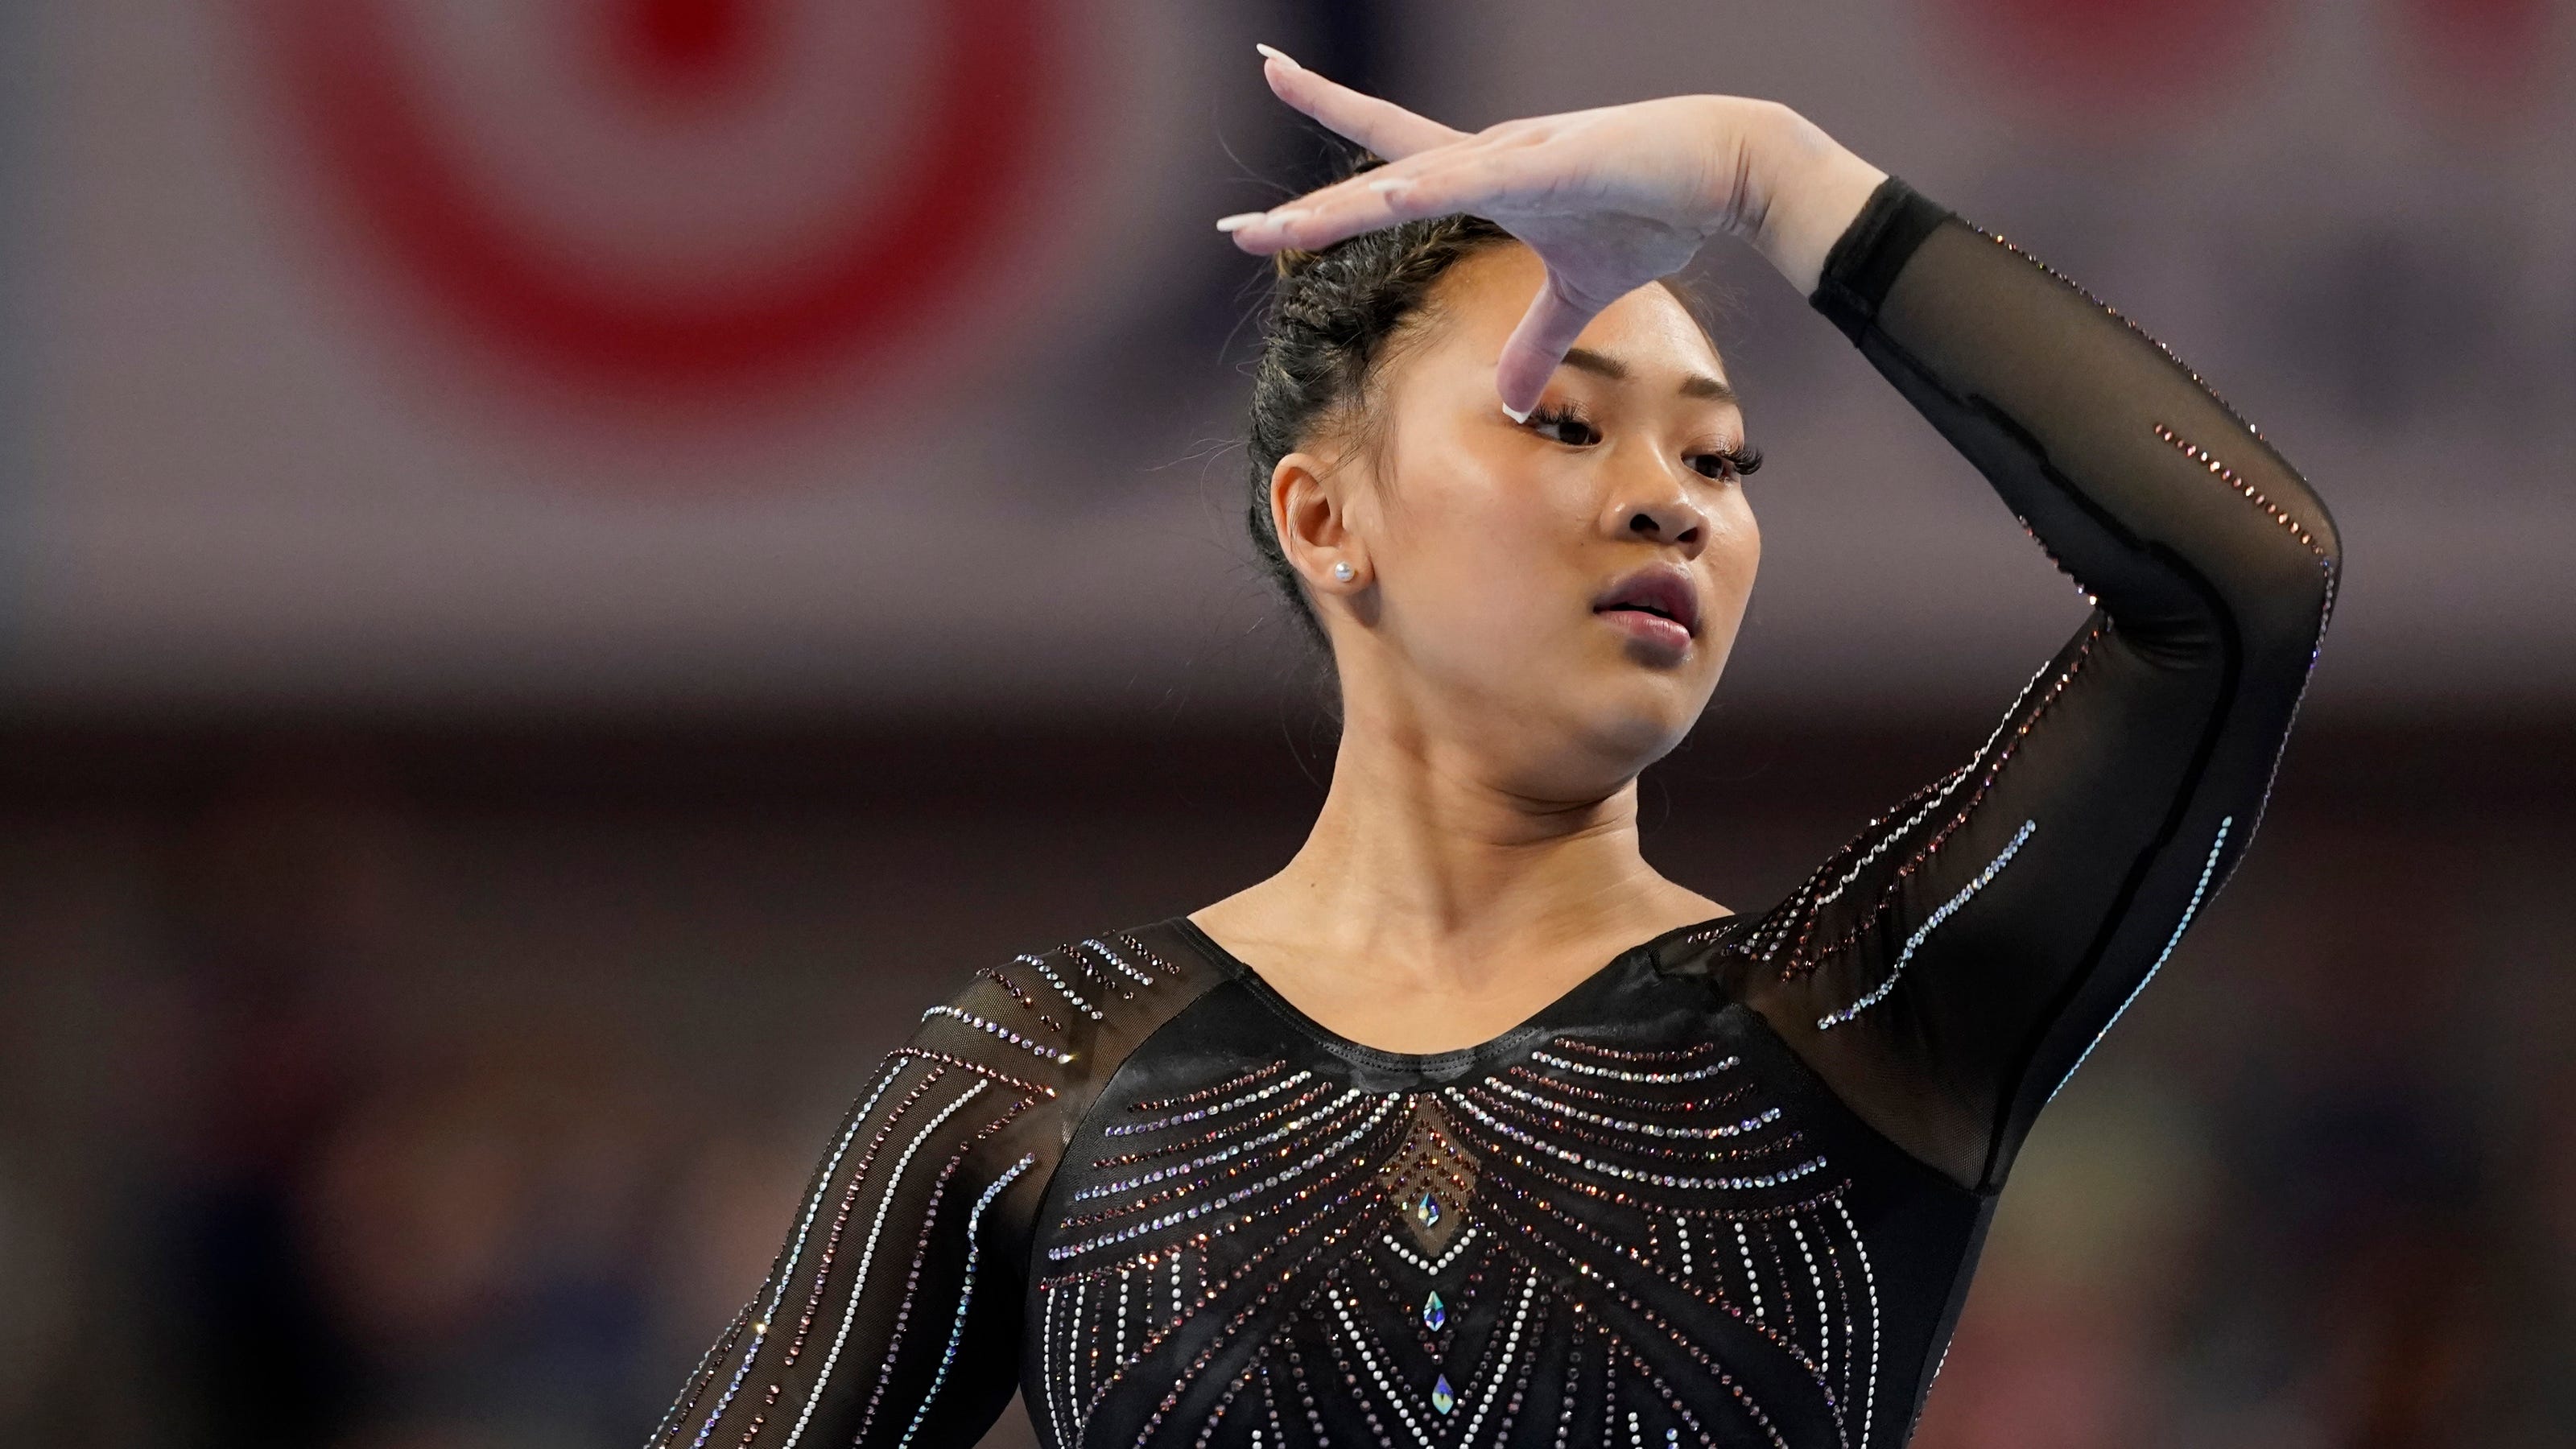 How to watch future Auburn gymnast Sunisa Lee at . Olympic trials